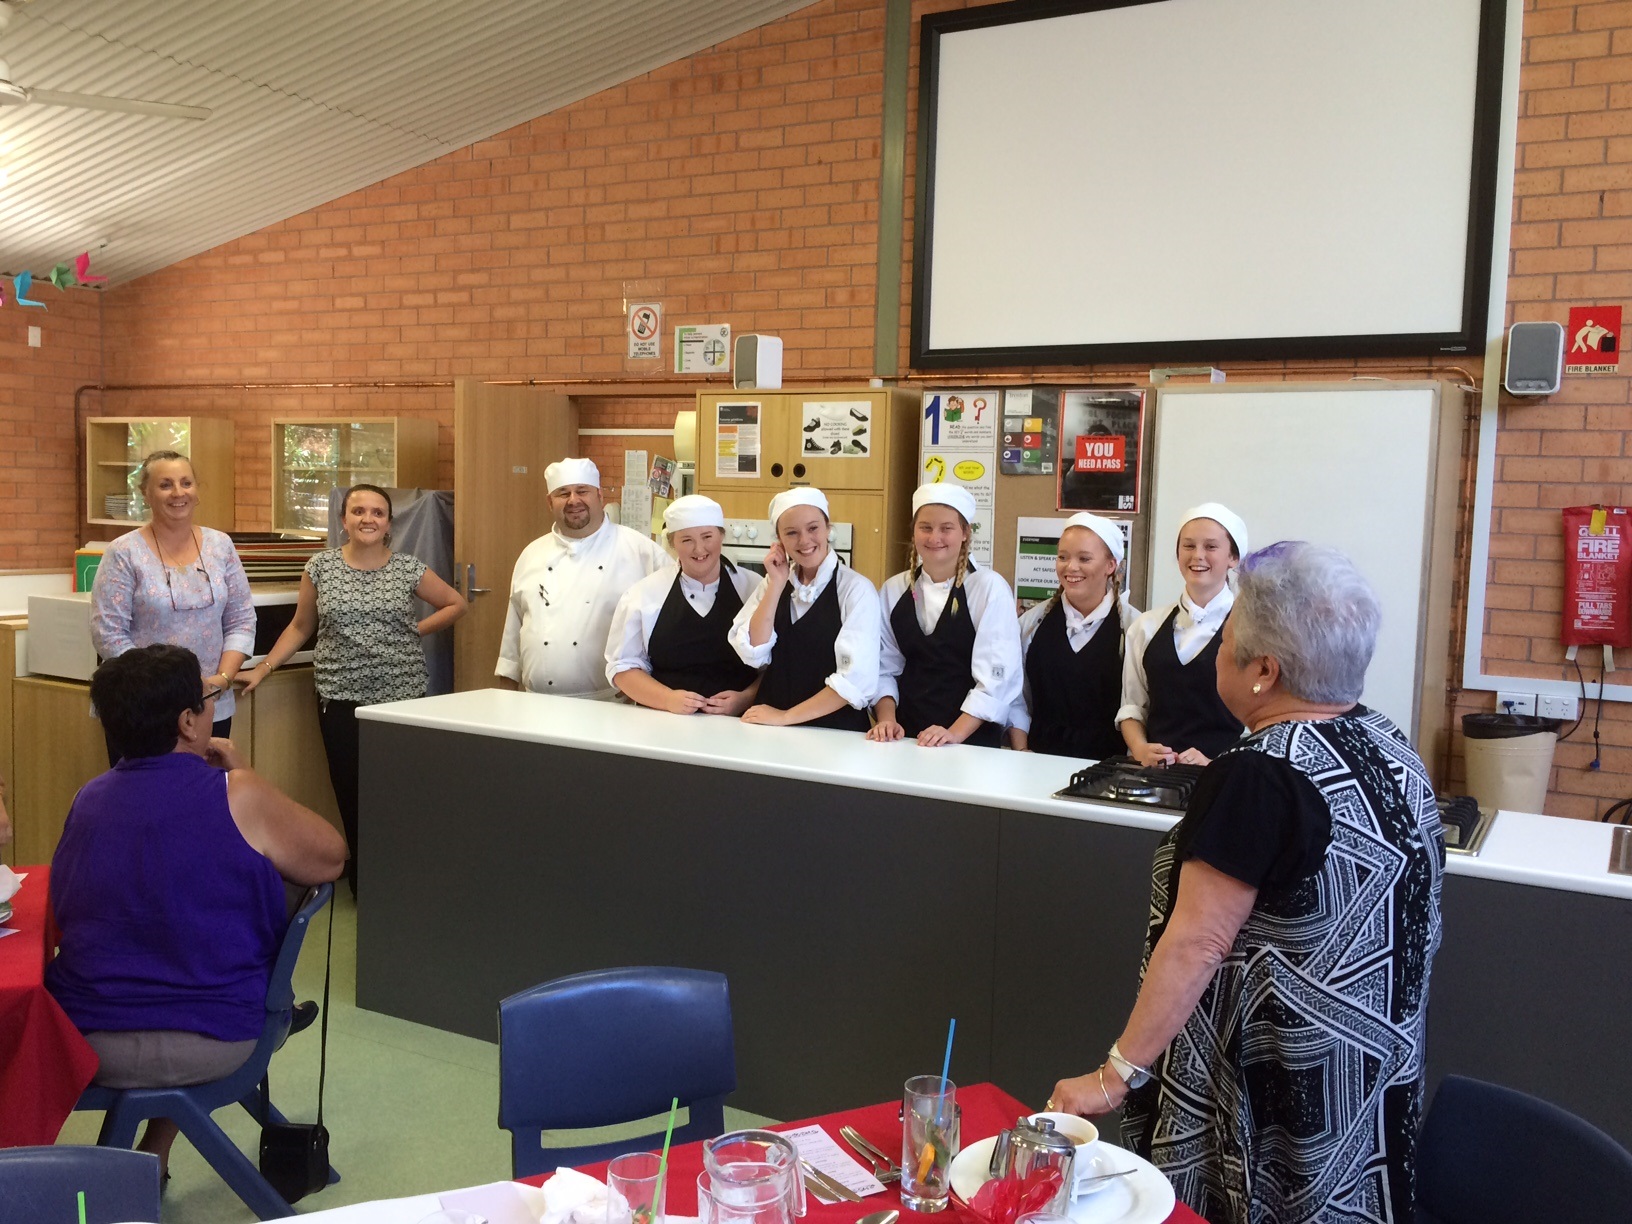 Jenny Noone (Head Teacher), Tash Alexander (Teacher) Mr Chris Enright (TAS Teacher) and student chefs, Leiteisha Rochester, Gabby Rae, Paige Focic, Emily Green and Nikita Taylor being thanked by Plan-It Youth Mentor Jan Noake